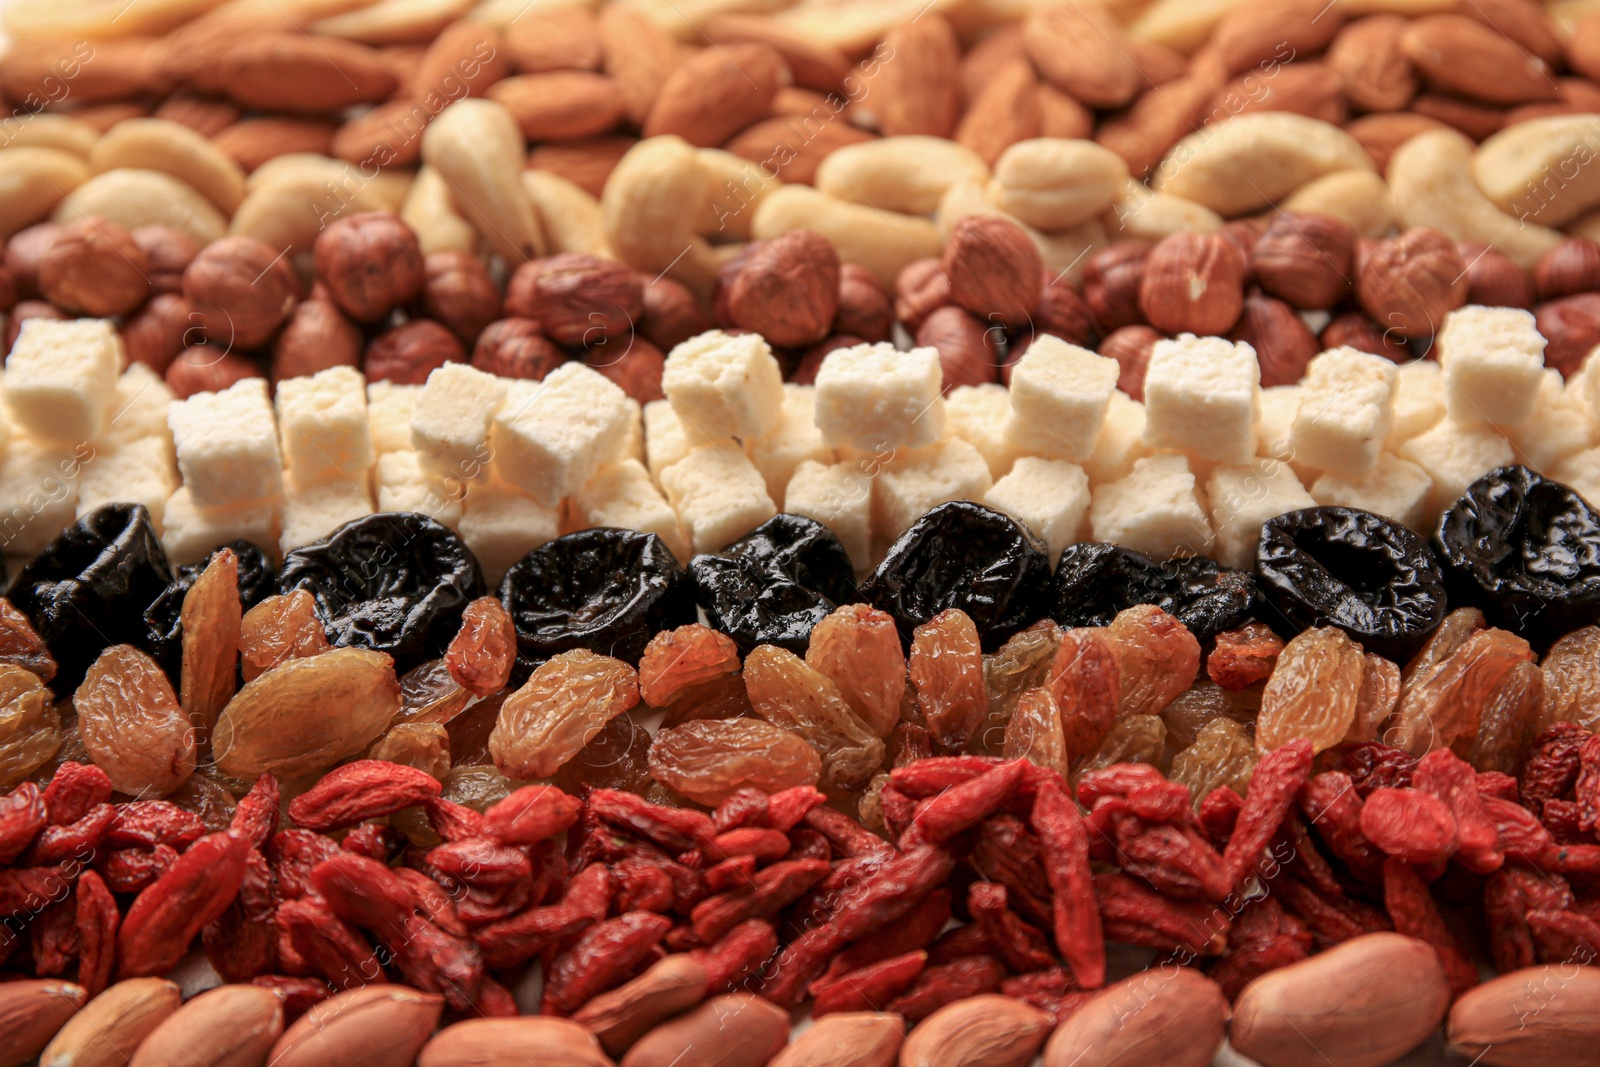 Photo of Different tasty nuts and dried fruits on beige background